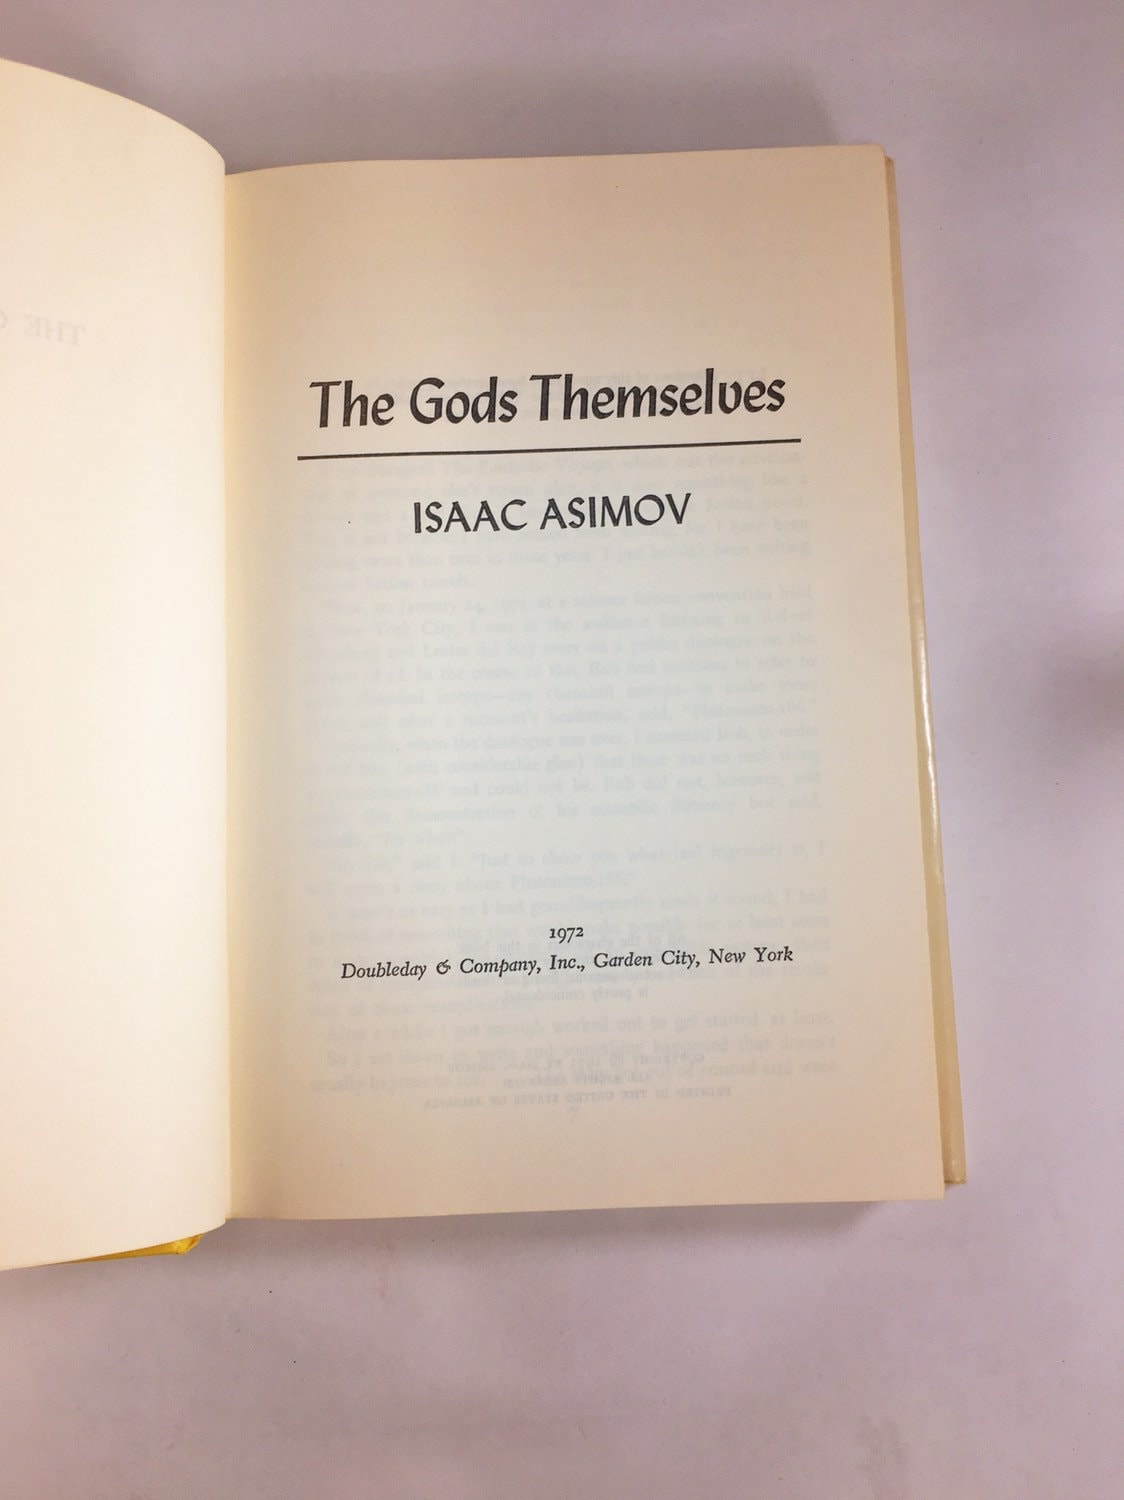 Gods Themselves. EARLY PRINTING vintage book by Issac Asimov circa 1972. Perfect gift for fans of vintage science fiction.